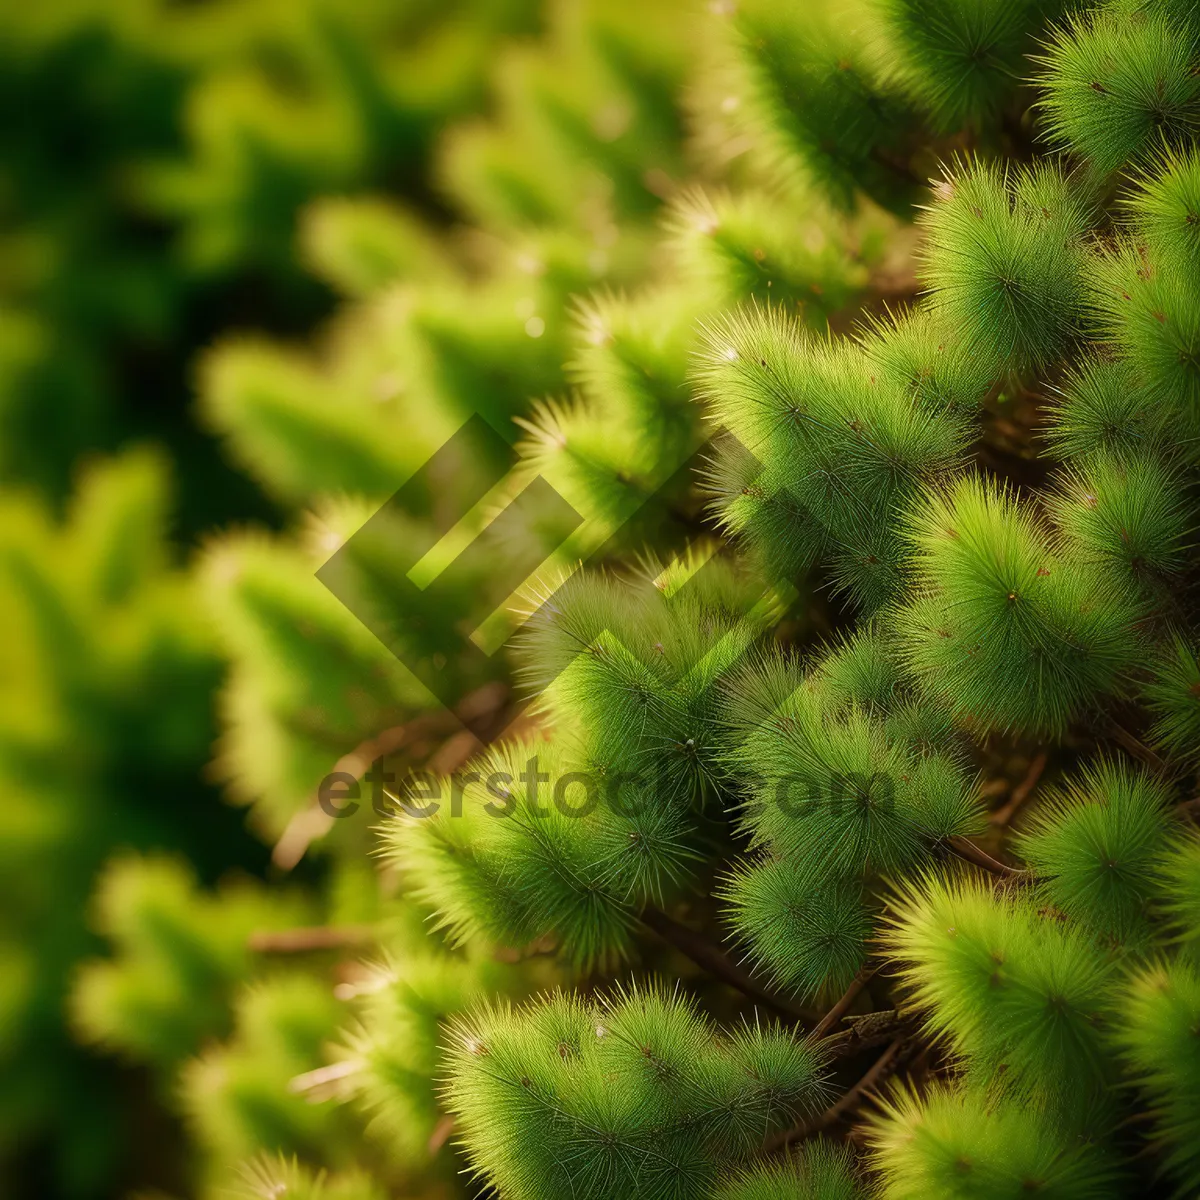 Picture of Prickly Desert Flora: Close-Up of Thorny Vascular Plant